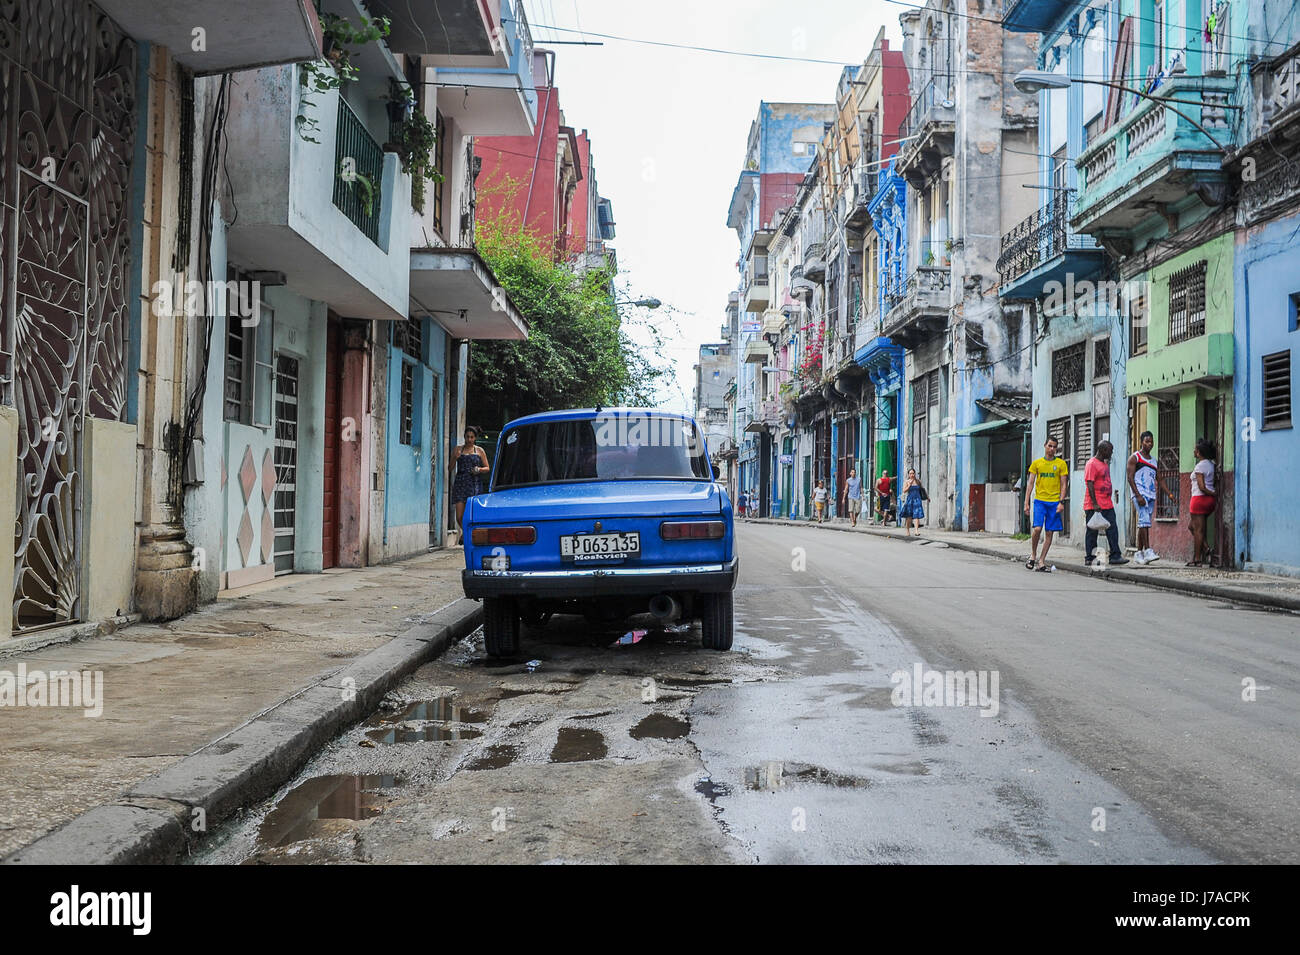 Old american classic car parked on the streets of Havana, Cuba Stock Photo